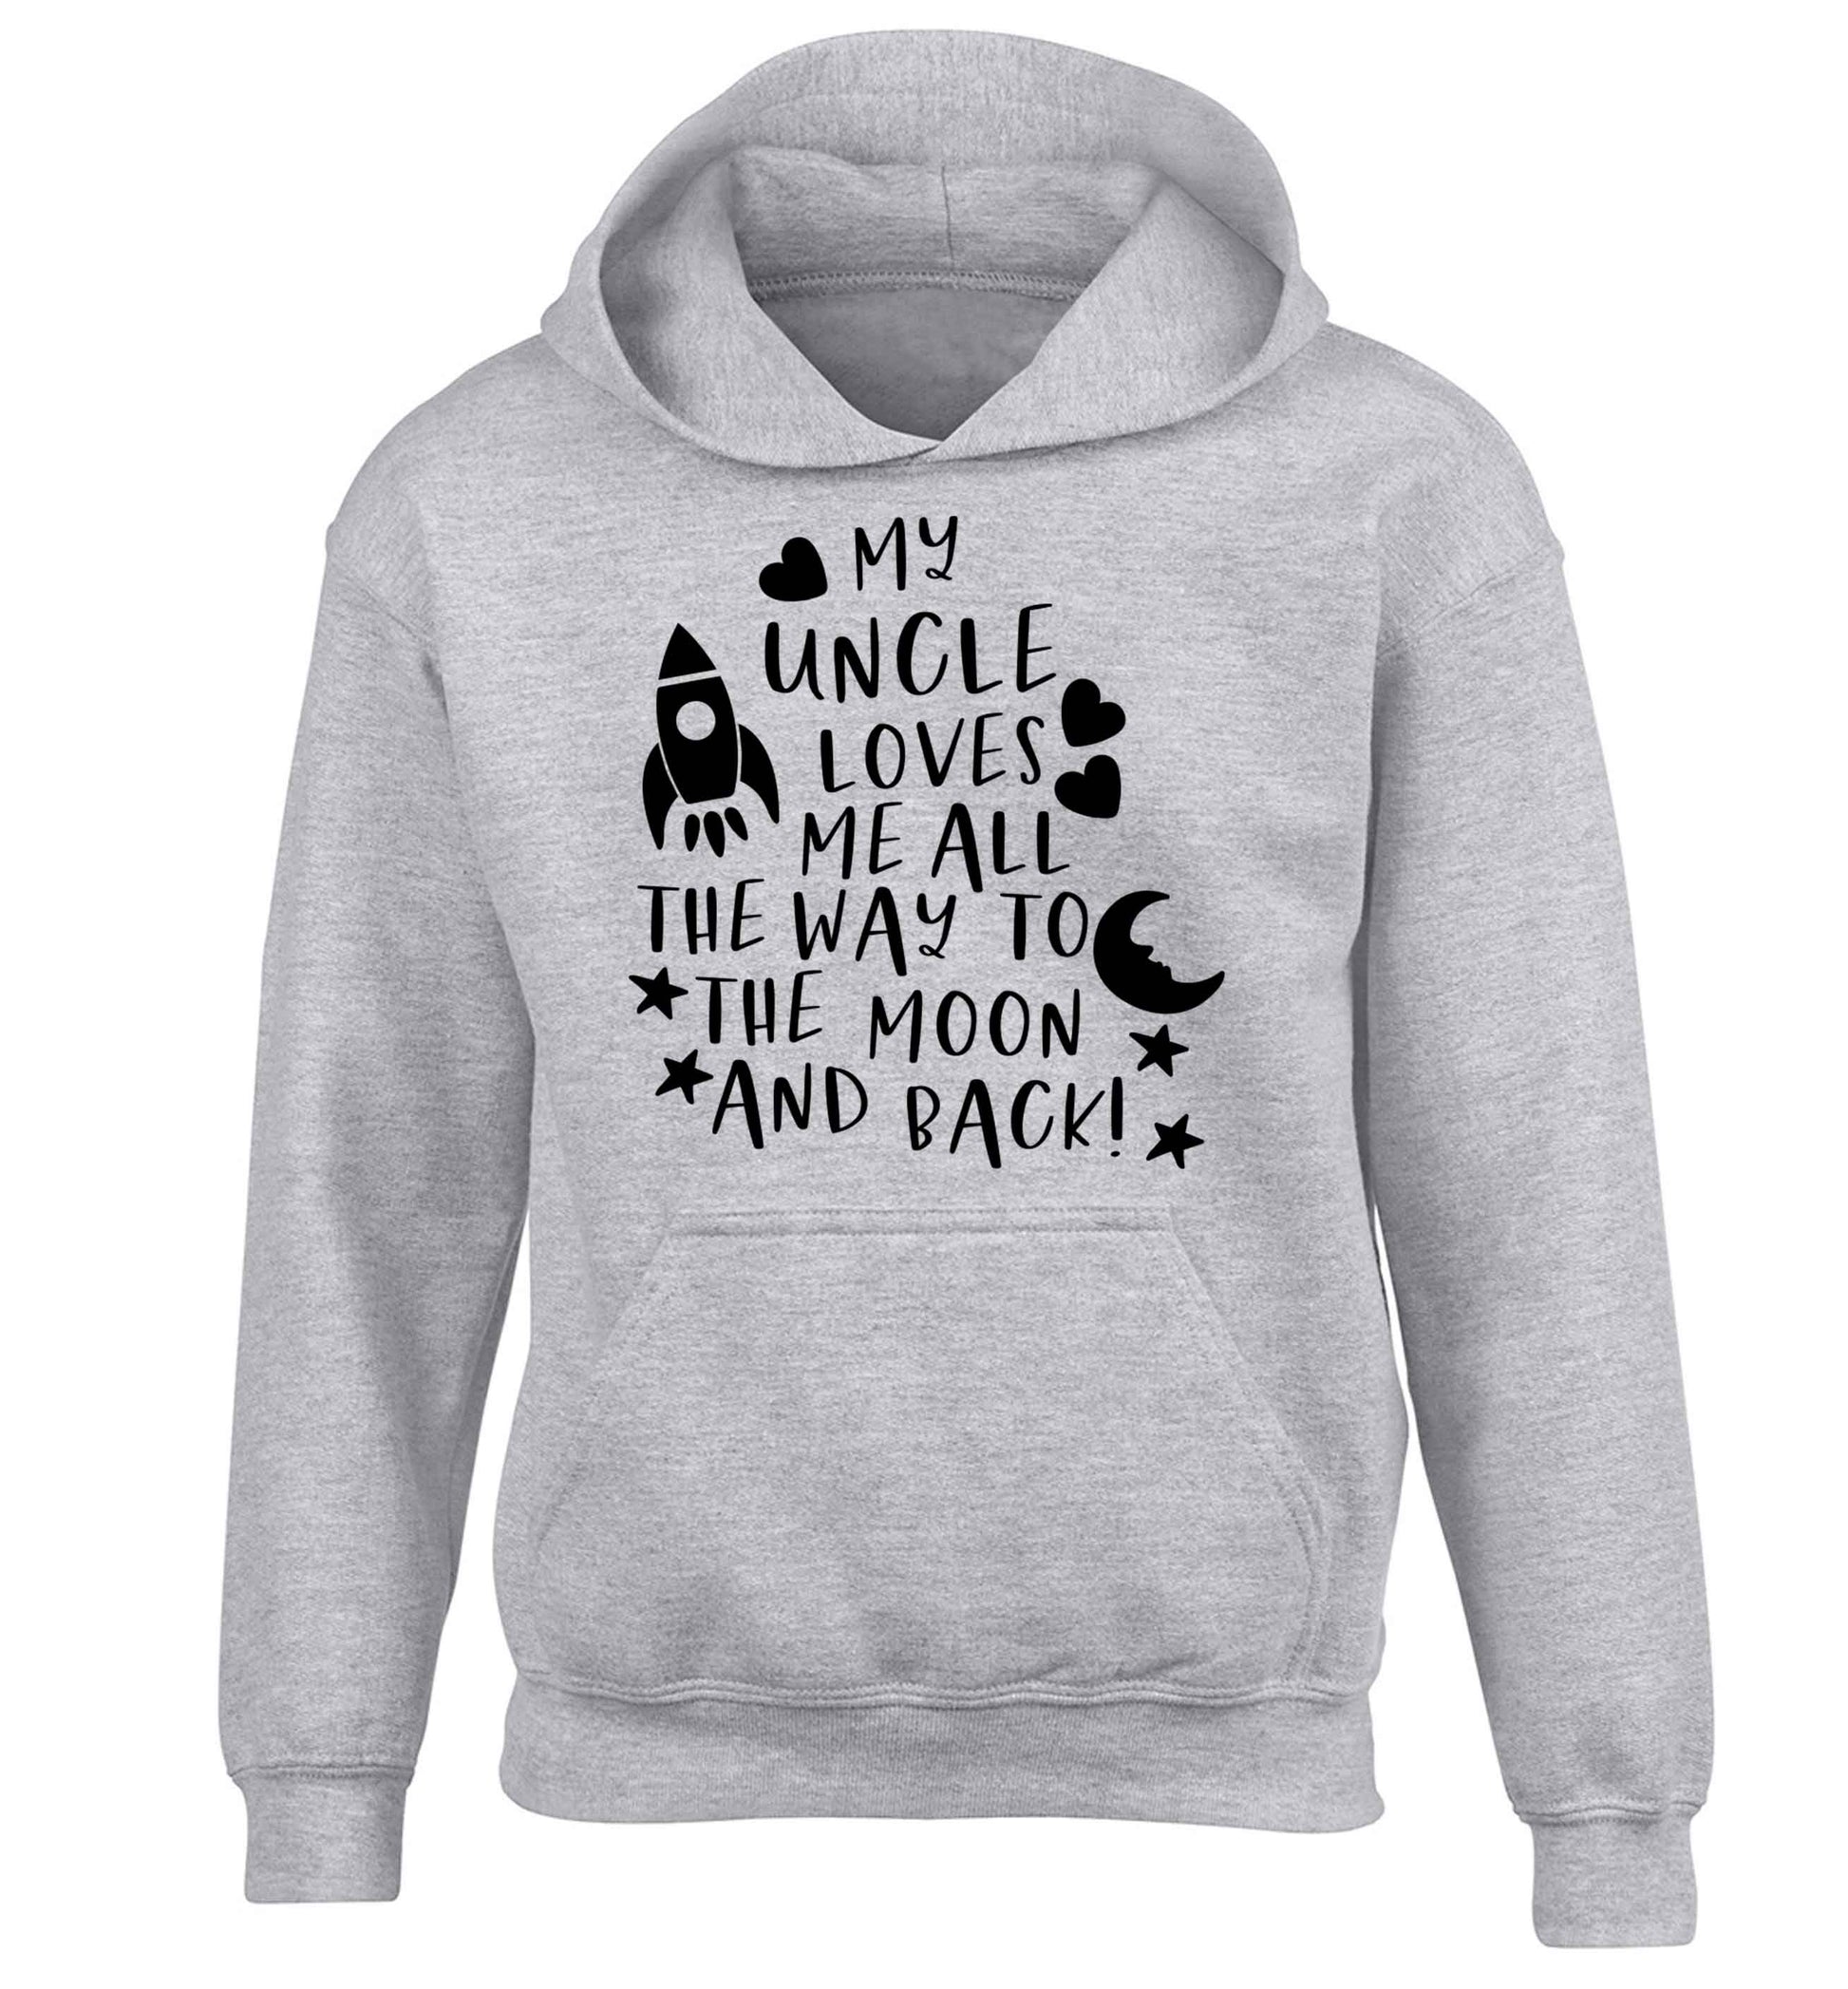 My uncle loves me all the way to the moon and back children's grey hoodie 12-13 Years